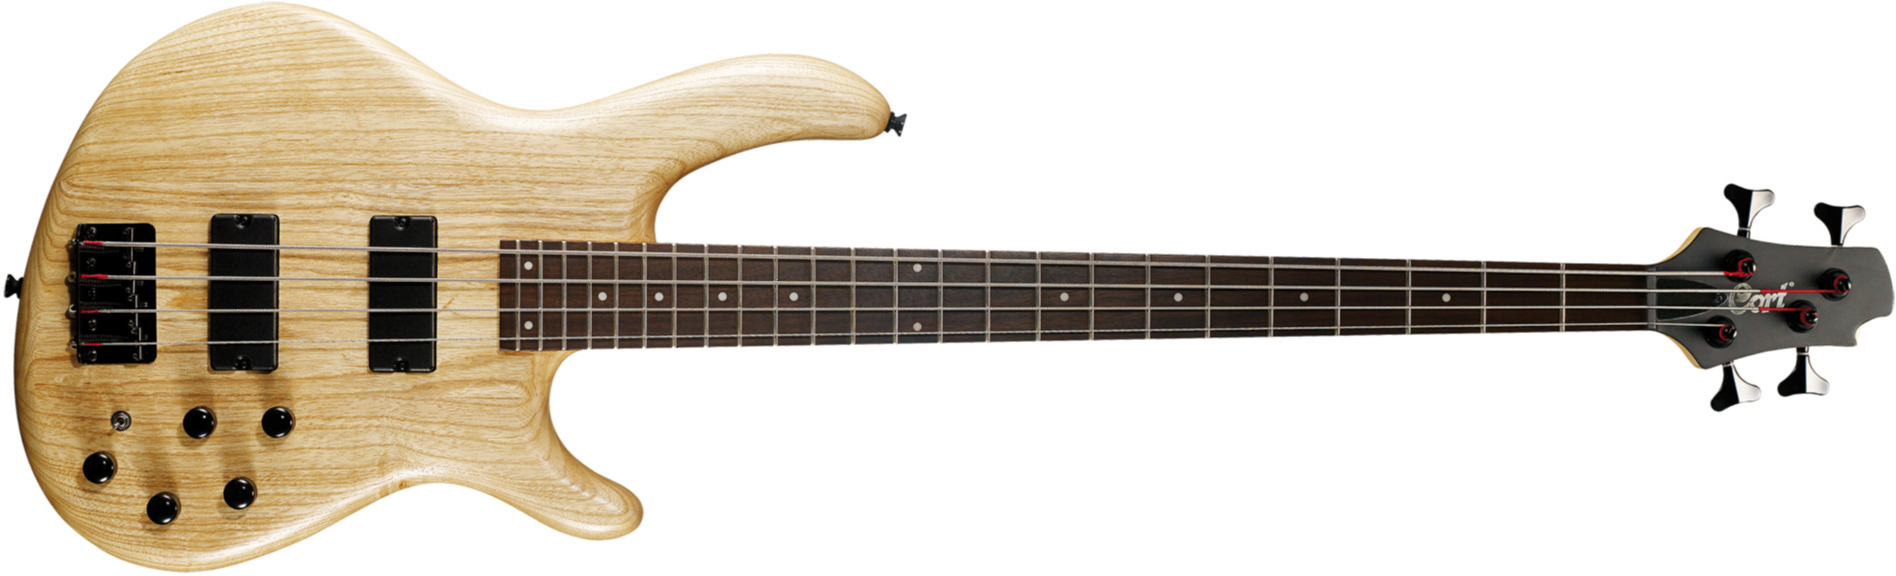 Cort Action Dlx As Opn Ash Rw - Natural Open Pore - Solid body electric bass - Main picture